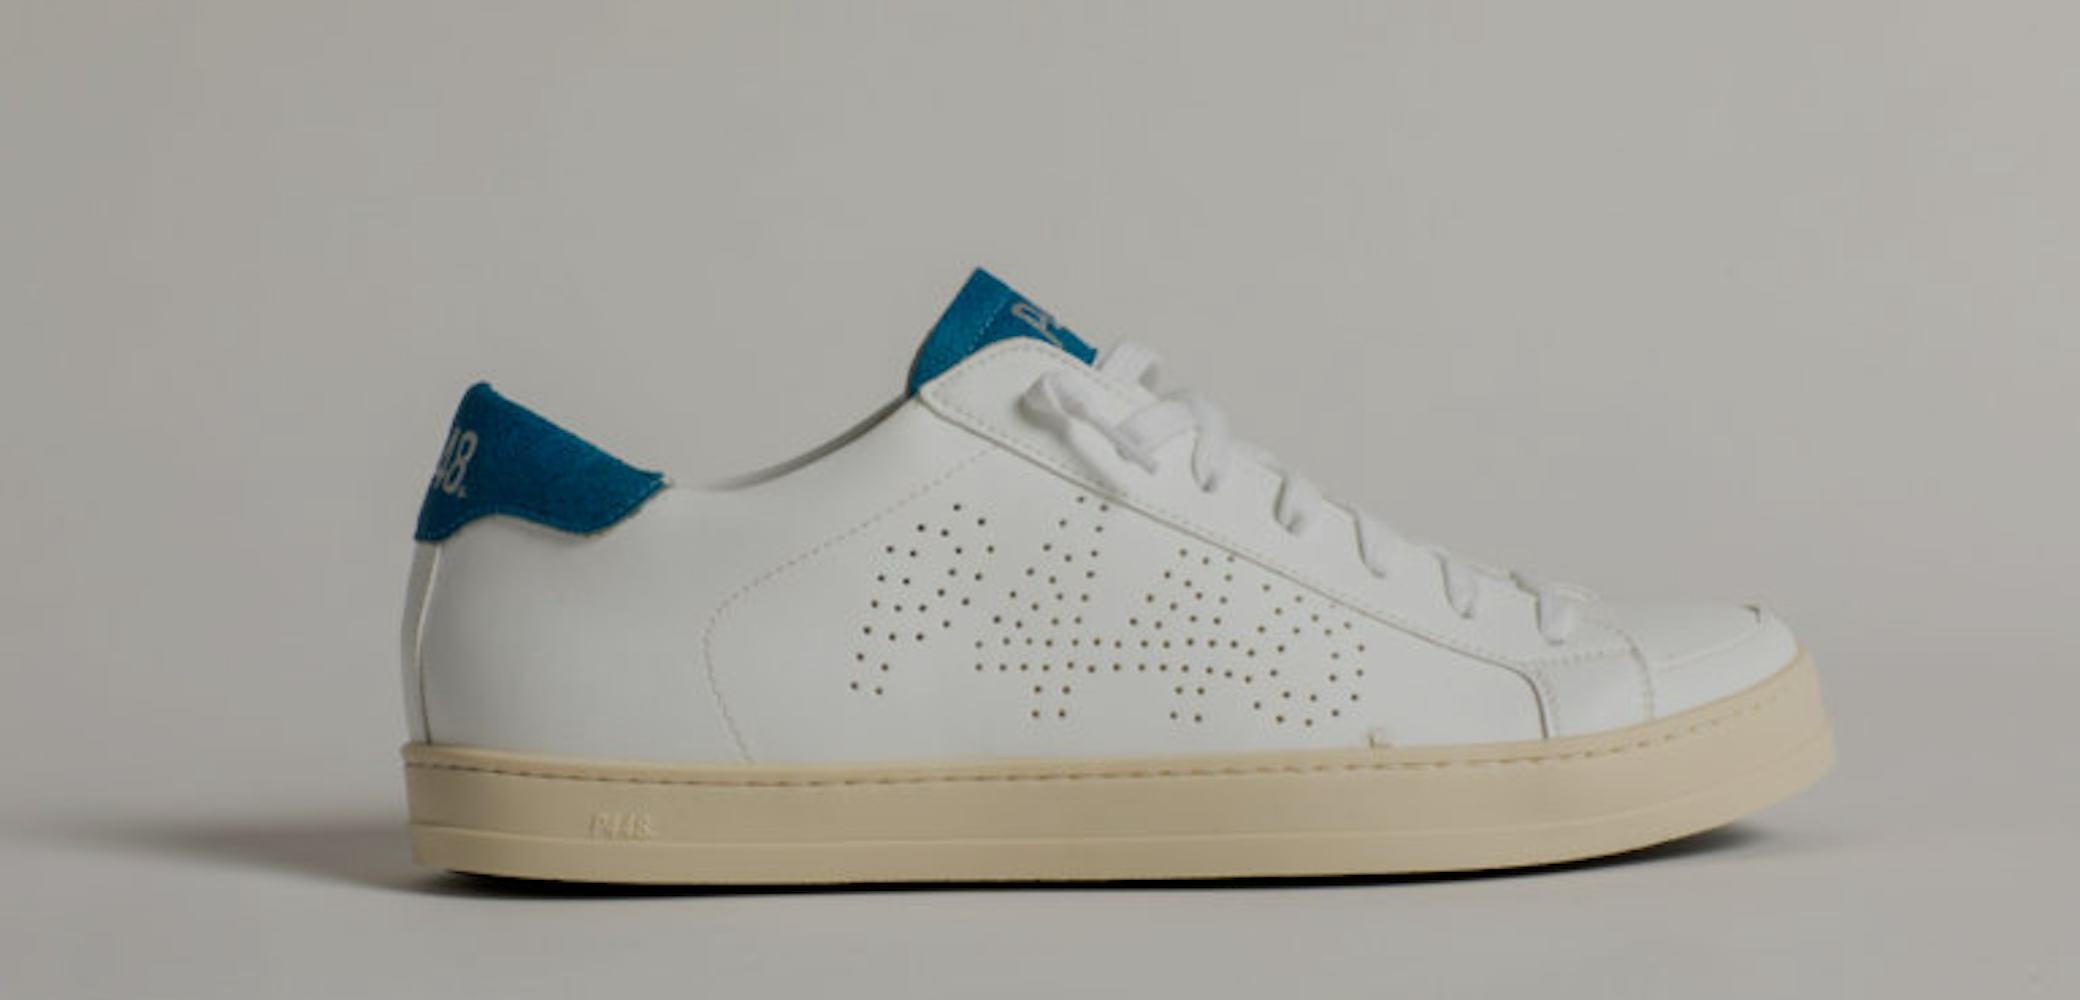 P448's sustainable sneaker uses leather from the invasive species lionfish